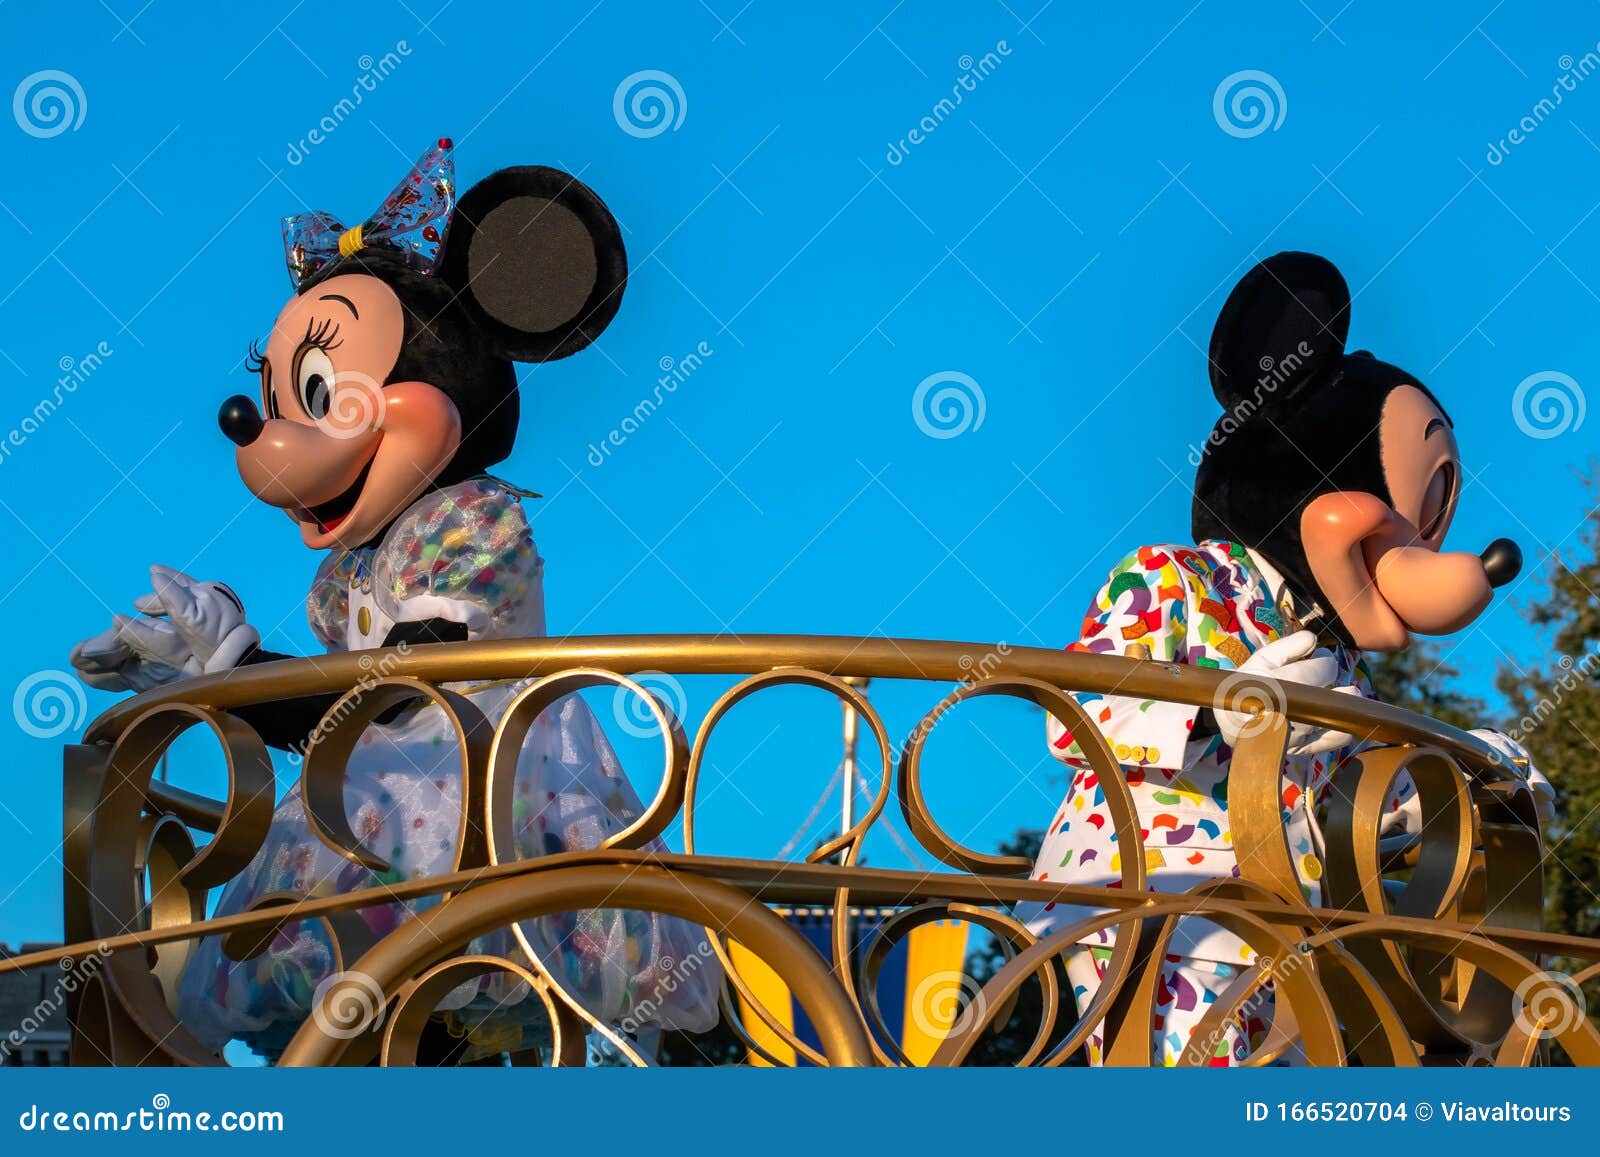 Mickey and Minnie in Move it! Shake it! MousekeDance it! Street Party at  Magic Kingdom 54 Editorial Stock Image - Image of animal, dragon: 166520704